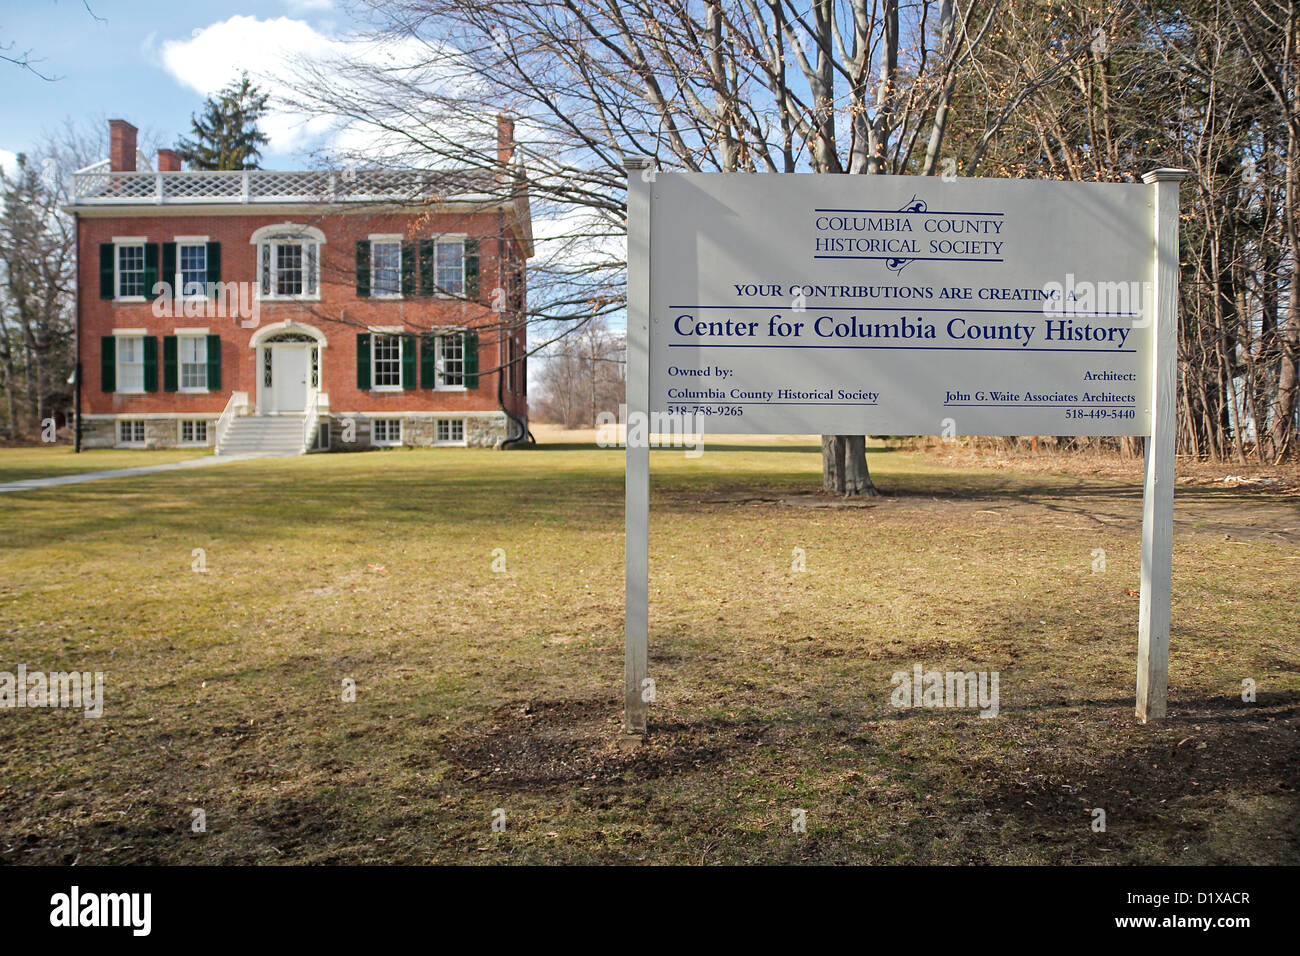 Center for Columbia County History sign in front of the Vanderpoel House of HIstory, Kinderhook, New York Stock Photo